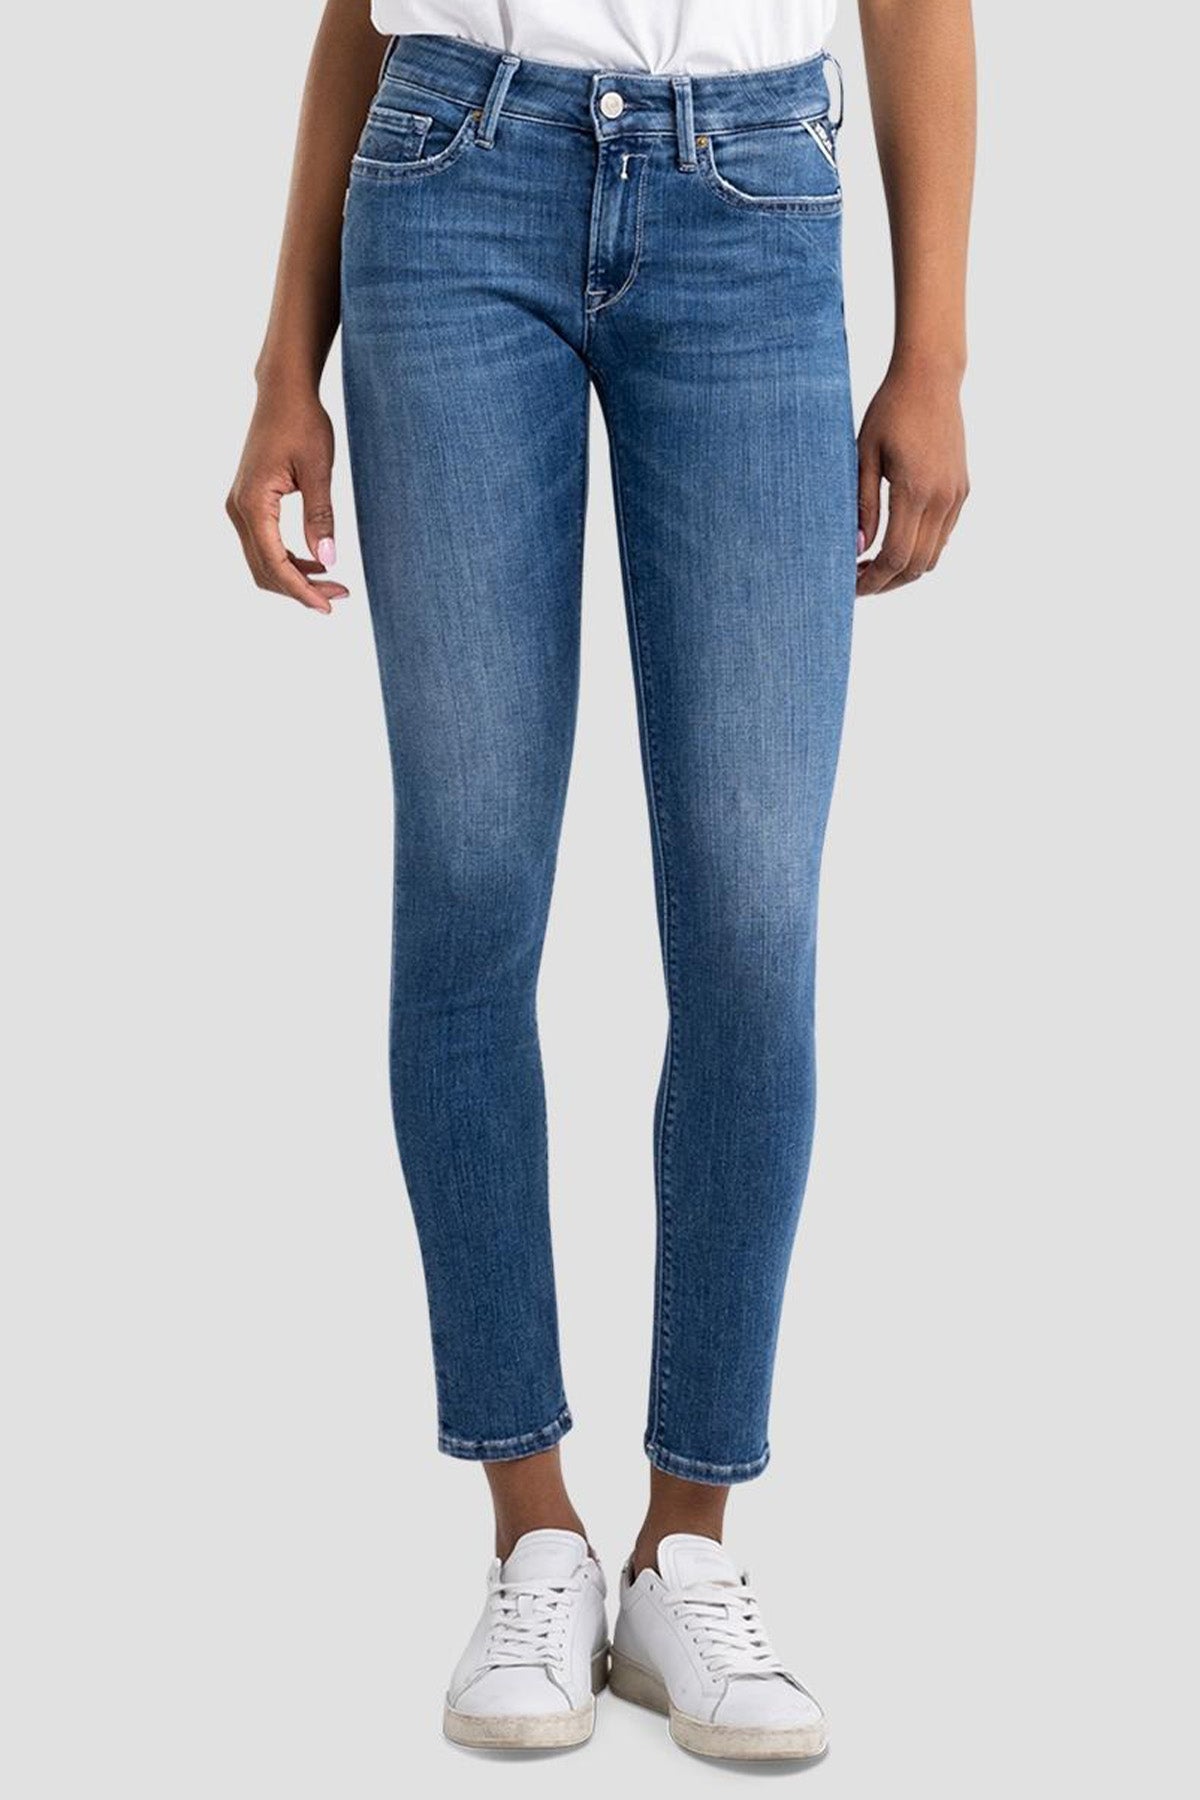 Replay New Luz Skinny Fit Jeans-Libas Trendy Fashion Store